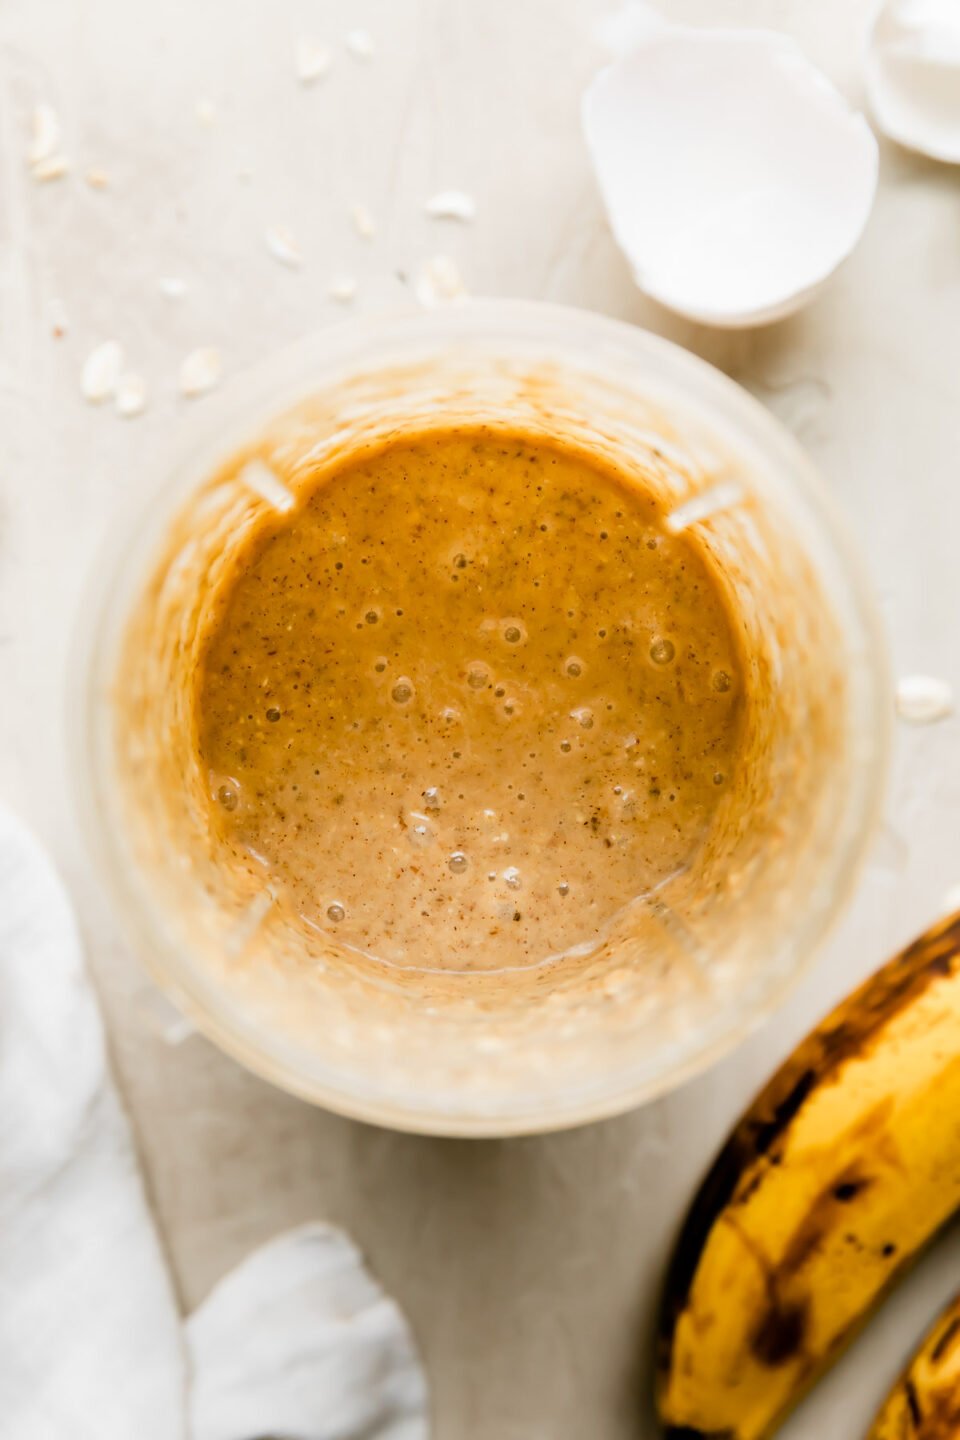 Banana oatmeal mug cake batter fills a personal blender jar that sits atop a creamy white textured surface. The jar is surrounded by a white linen napkin, loose oats, two ripe bananas, and a discarded egg shell broken in half.